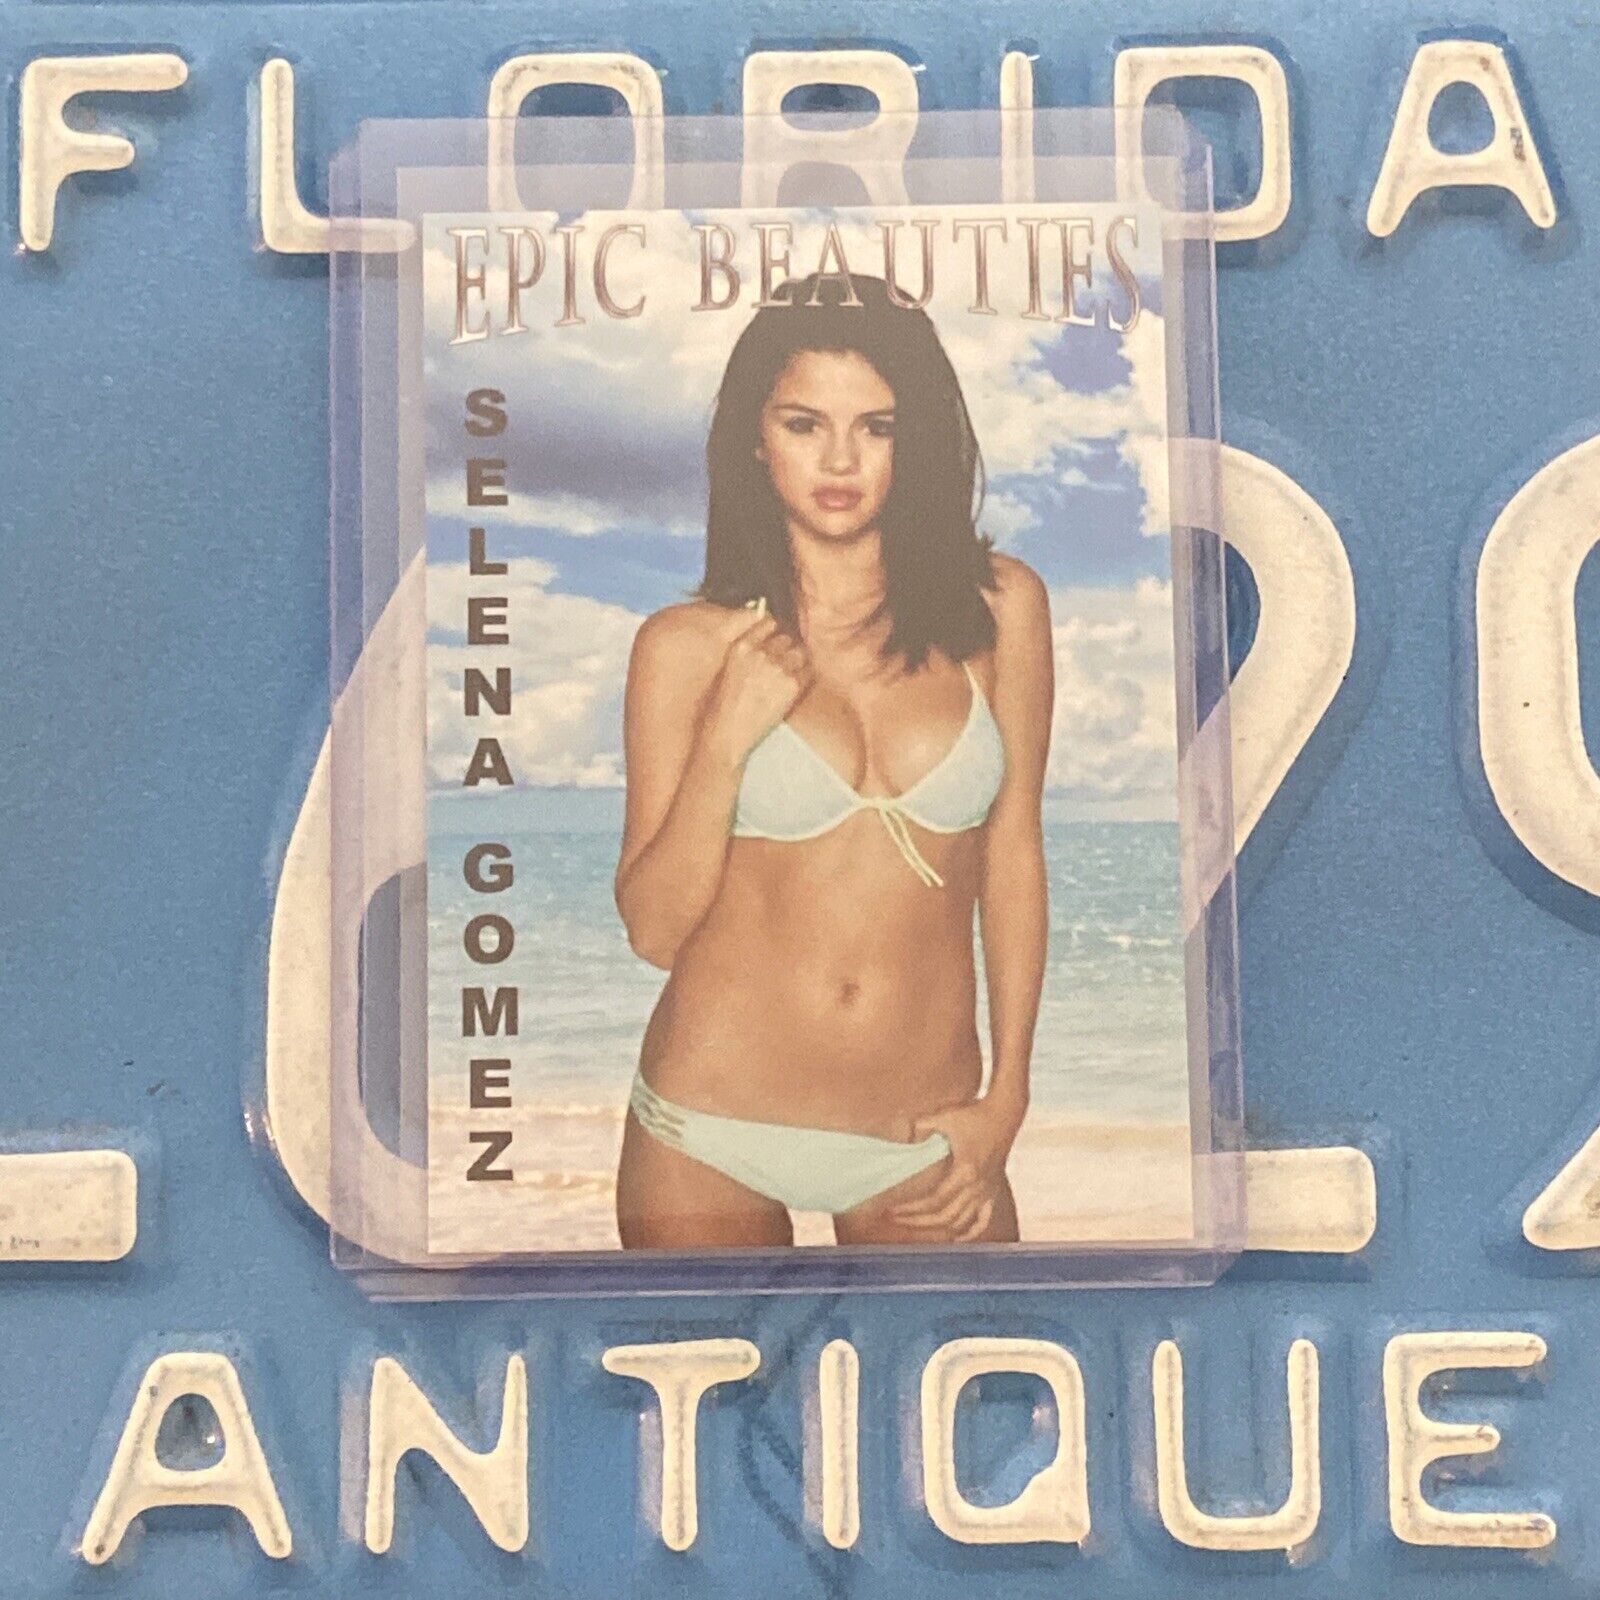 Florida Antique License Plate￼. Price to sell fast￼